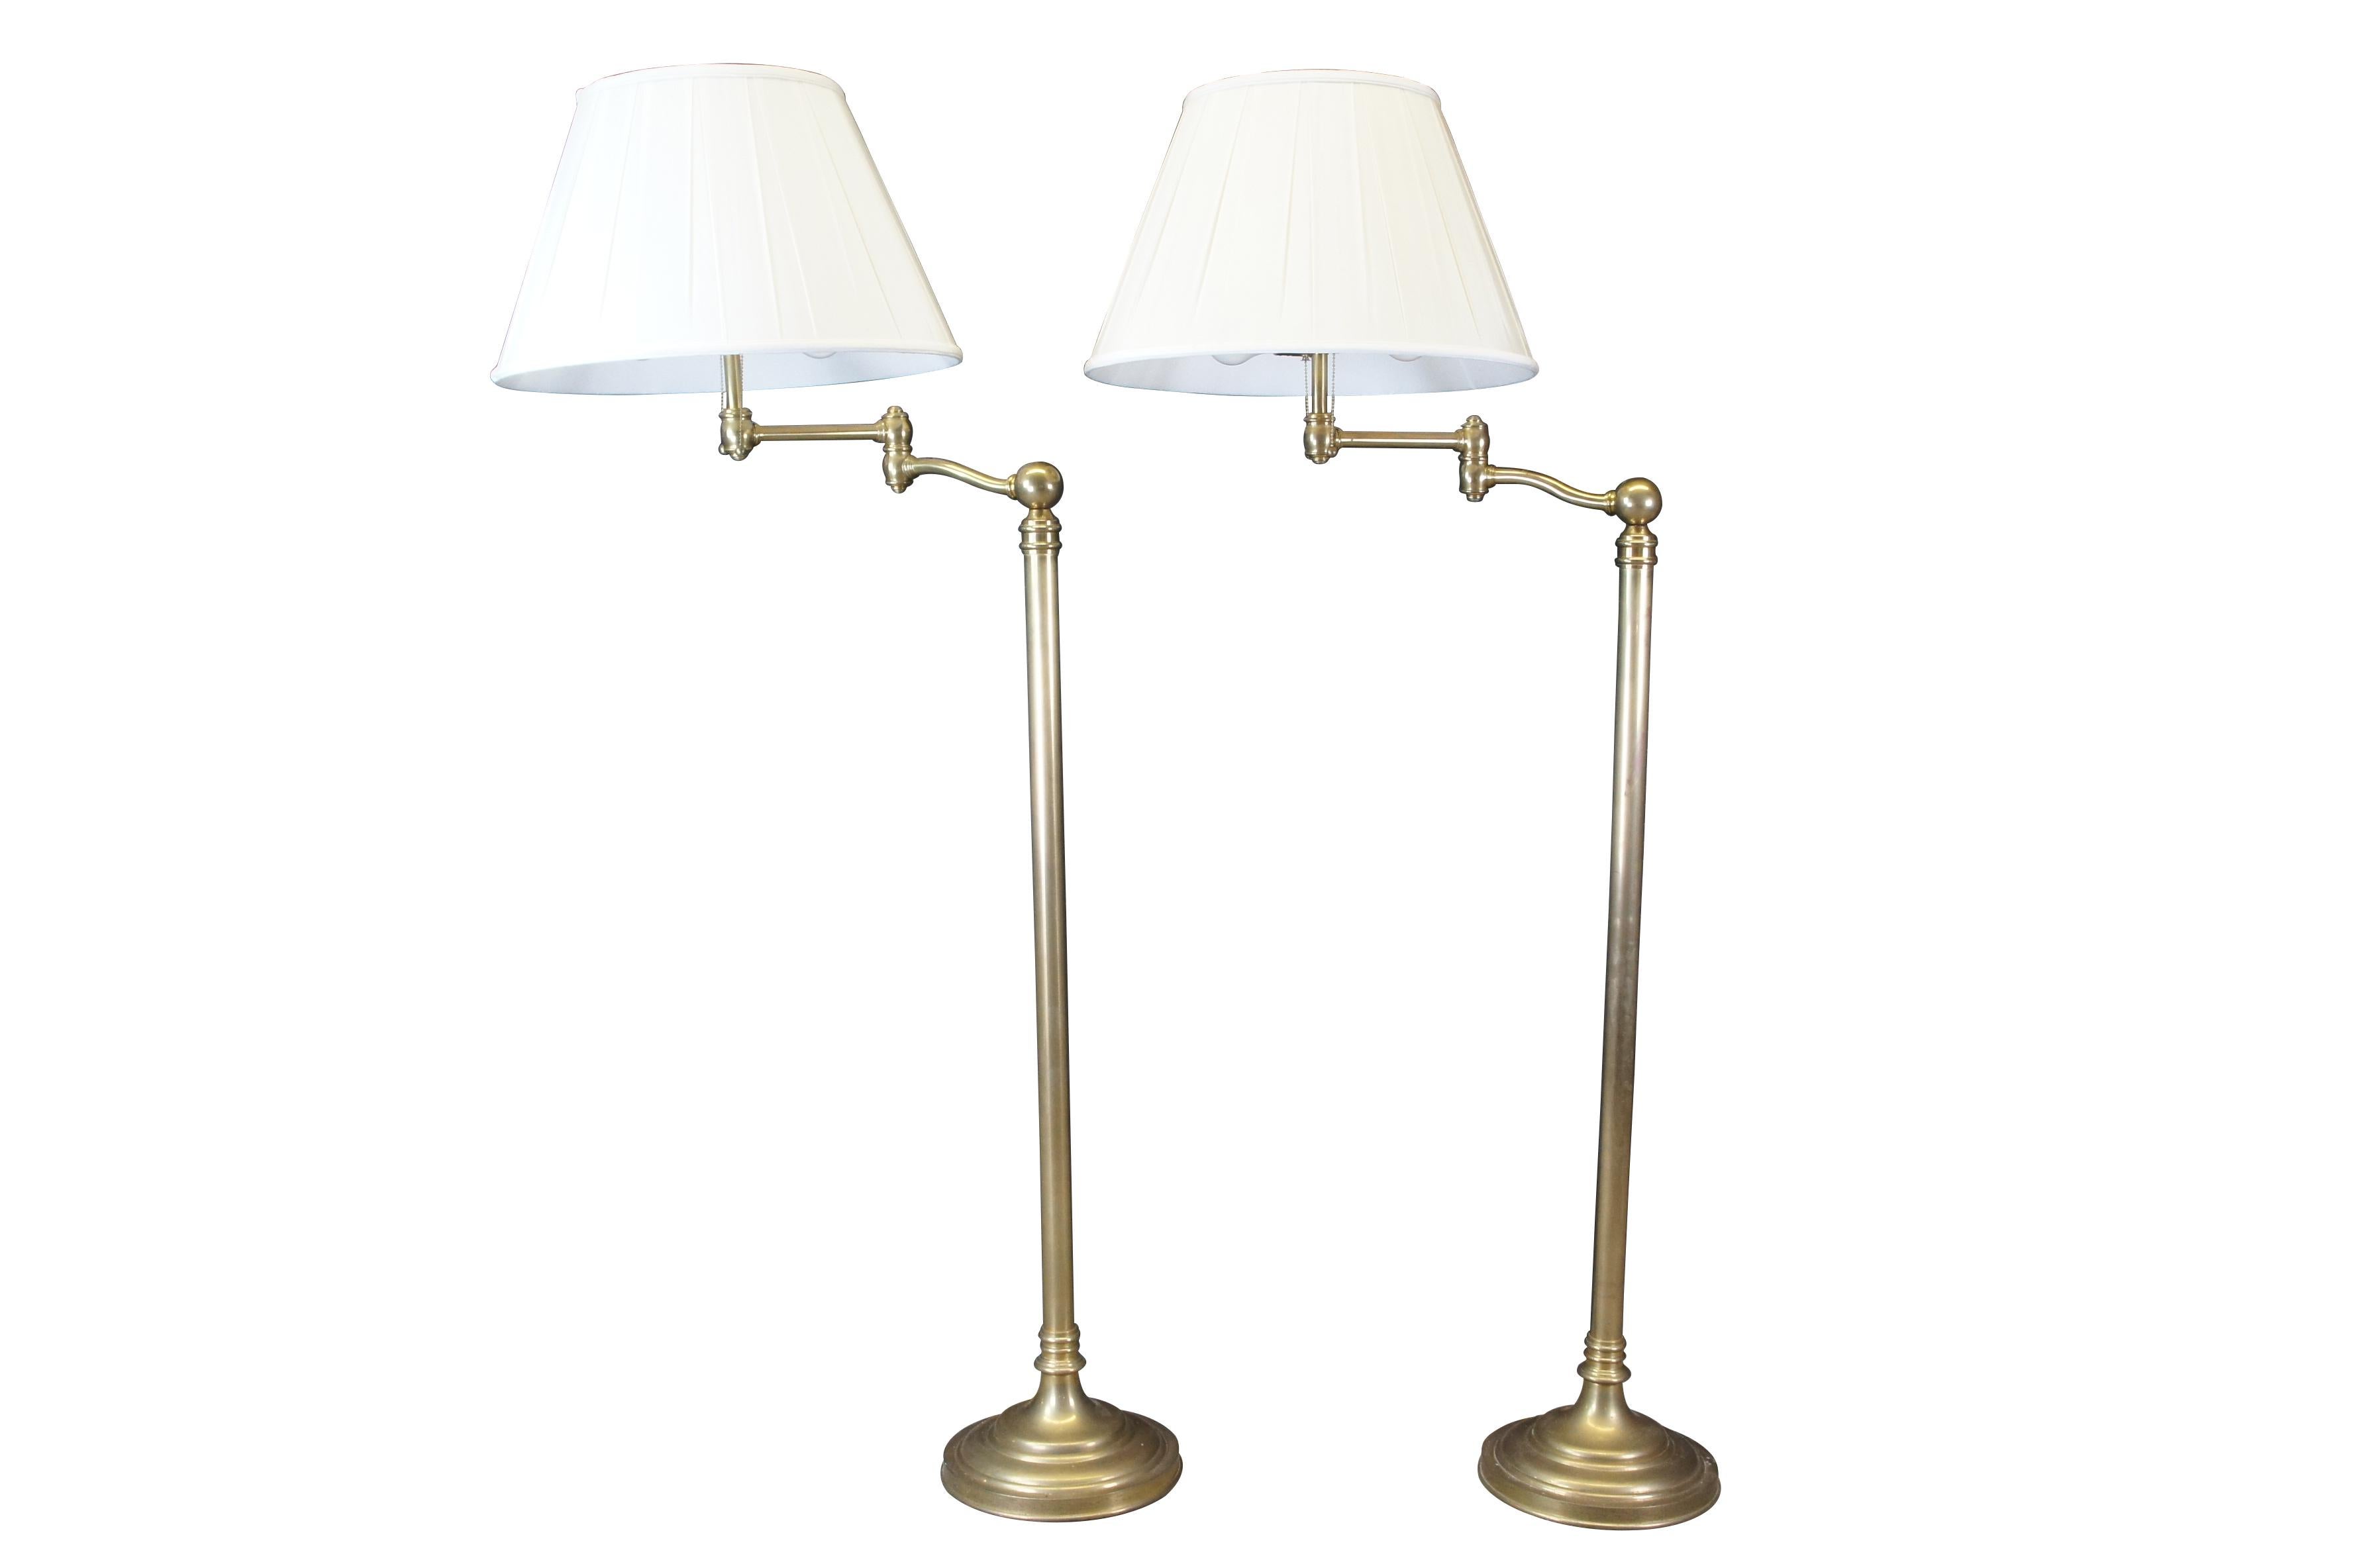 2 Visual Comfort Sargent Swing Arm Floor Lamp, Designed by Ralph Lauren.  Features Natural Antiqued Brass with Silk Shades.  The lamp has two lights both with their own pull switch.

Dimensions:
64